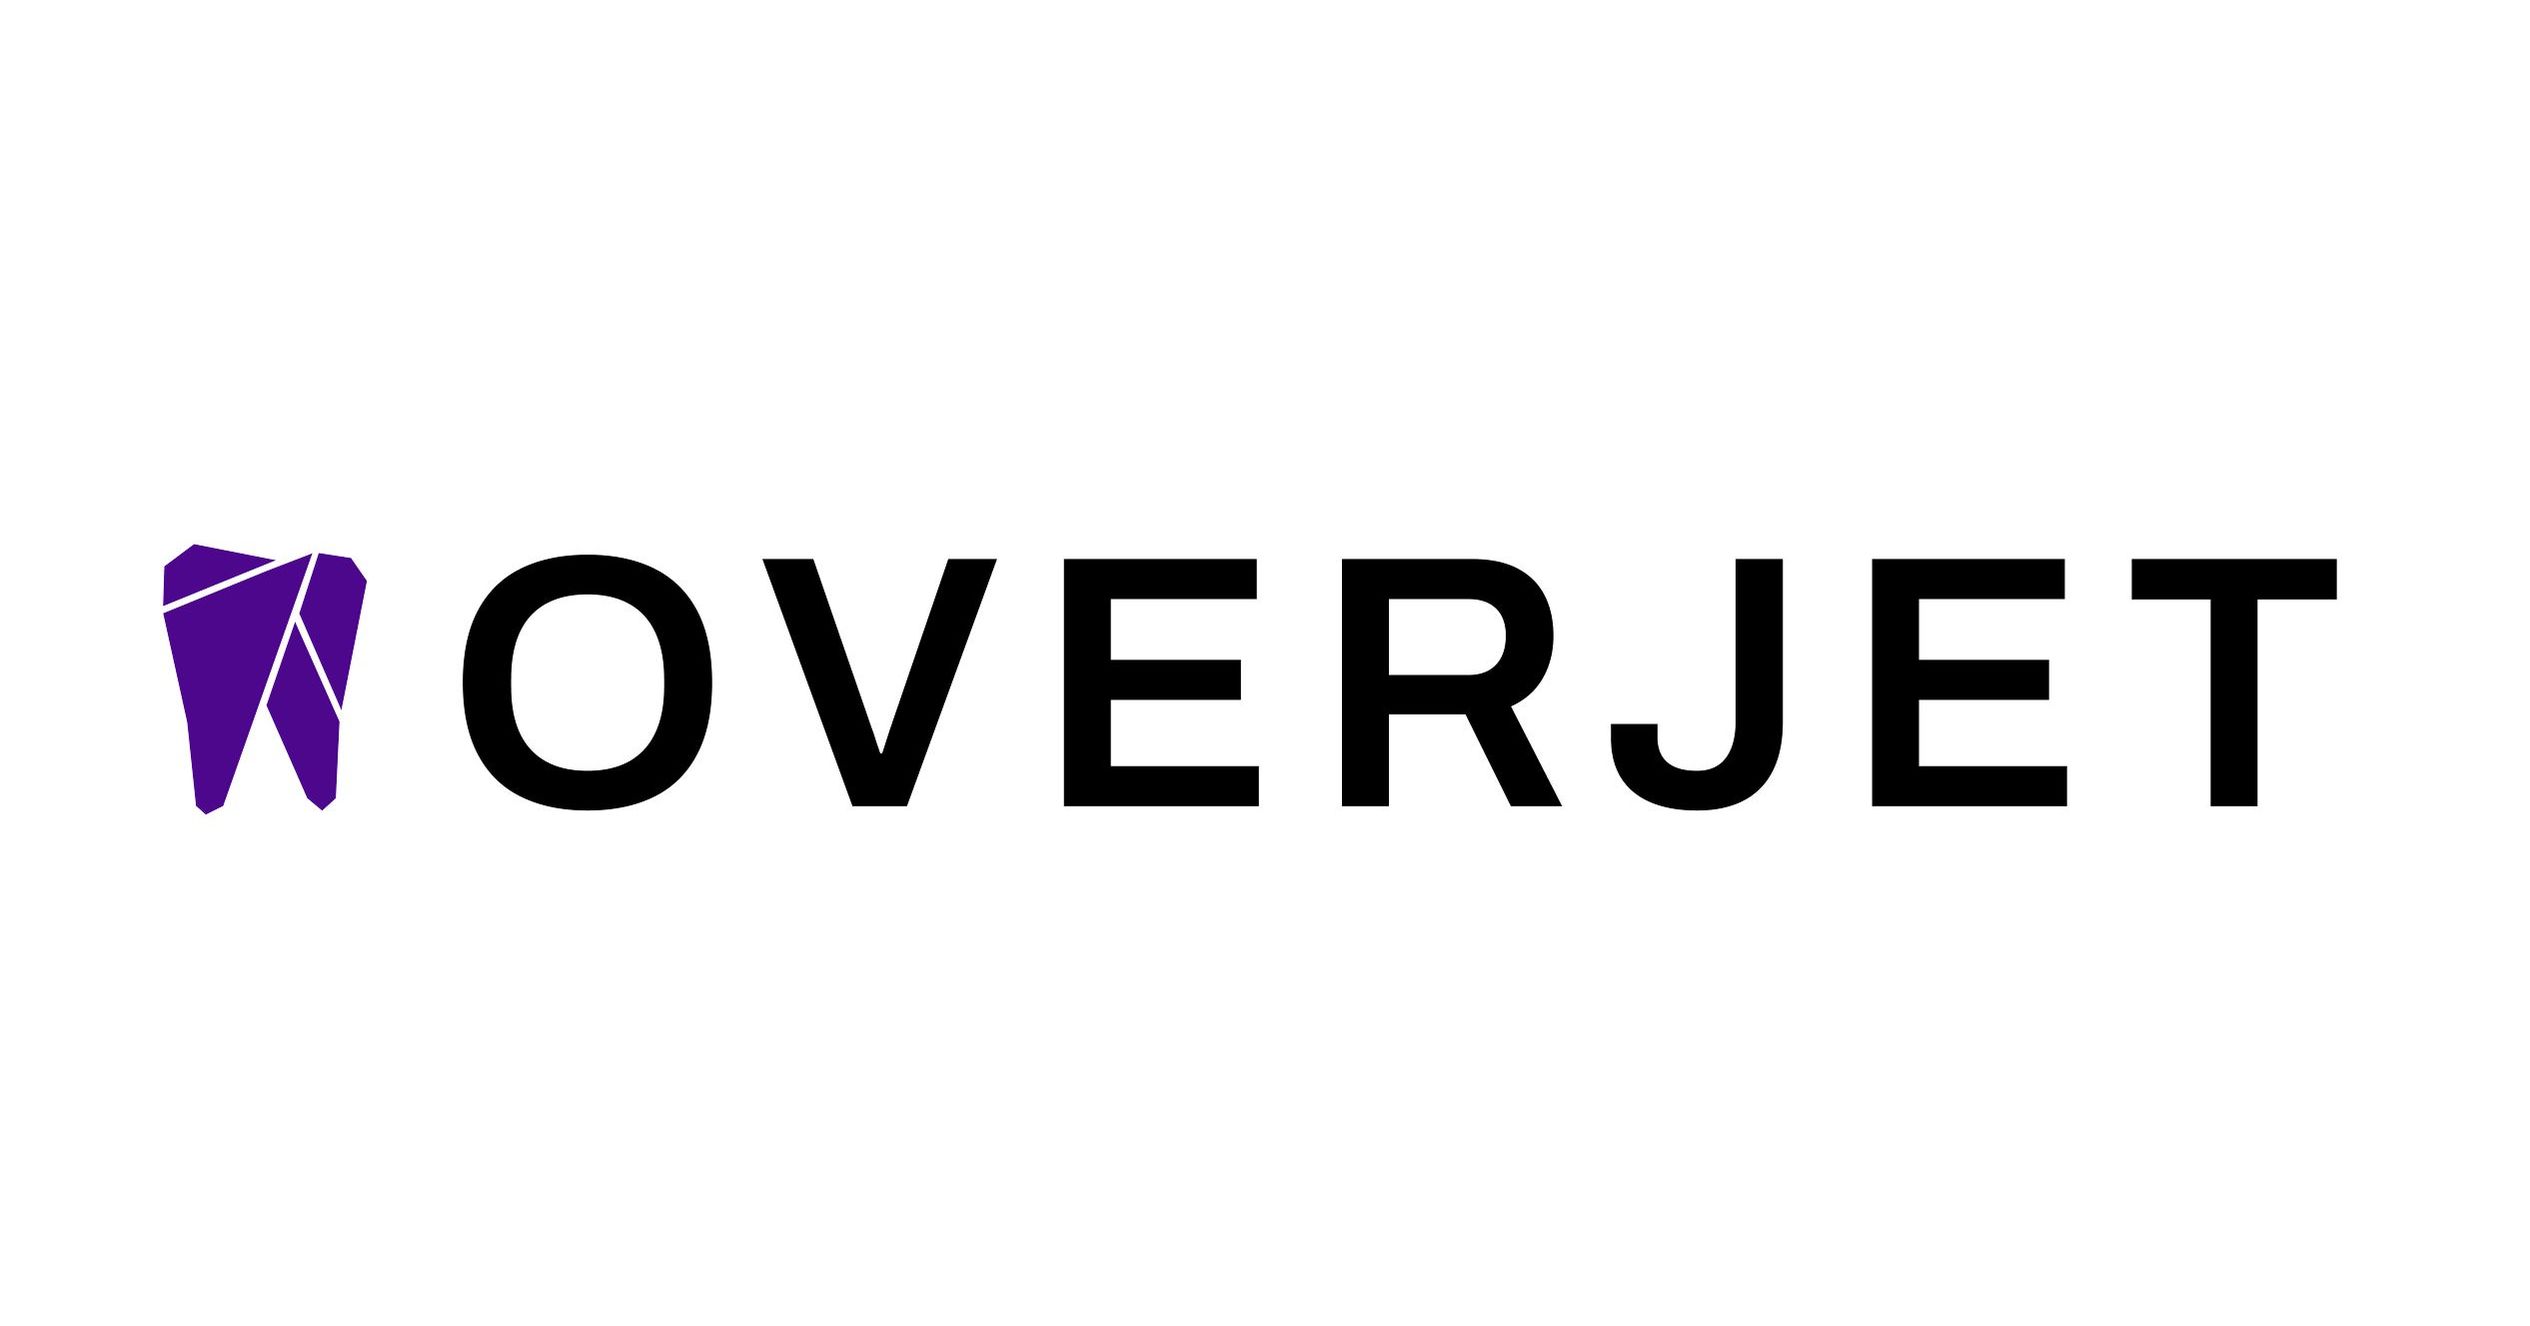 Overjet Named to Forbes AI 50 List of Most Promising AI Companies Shaping the Future